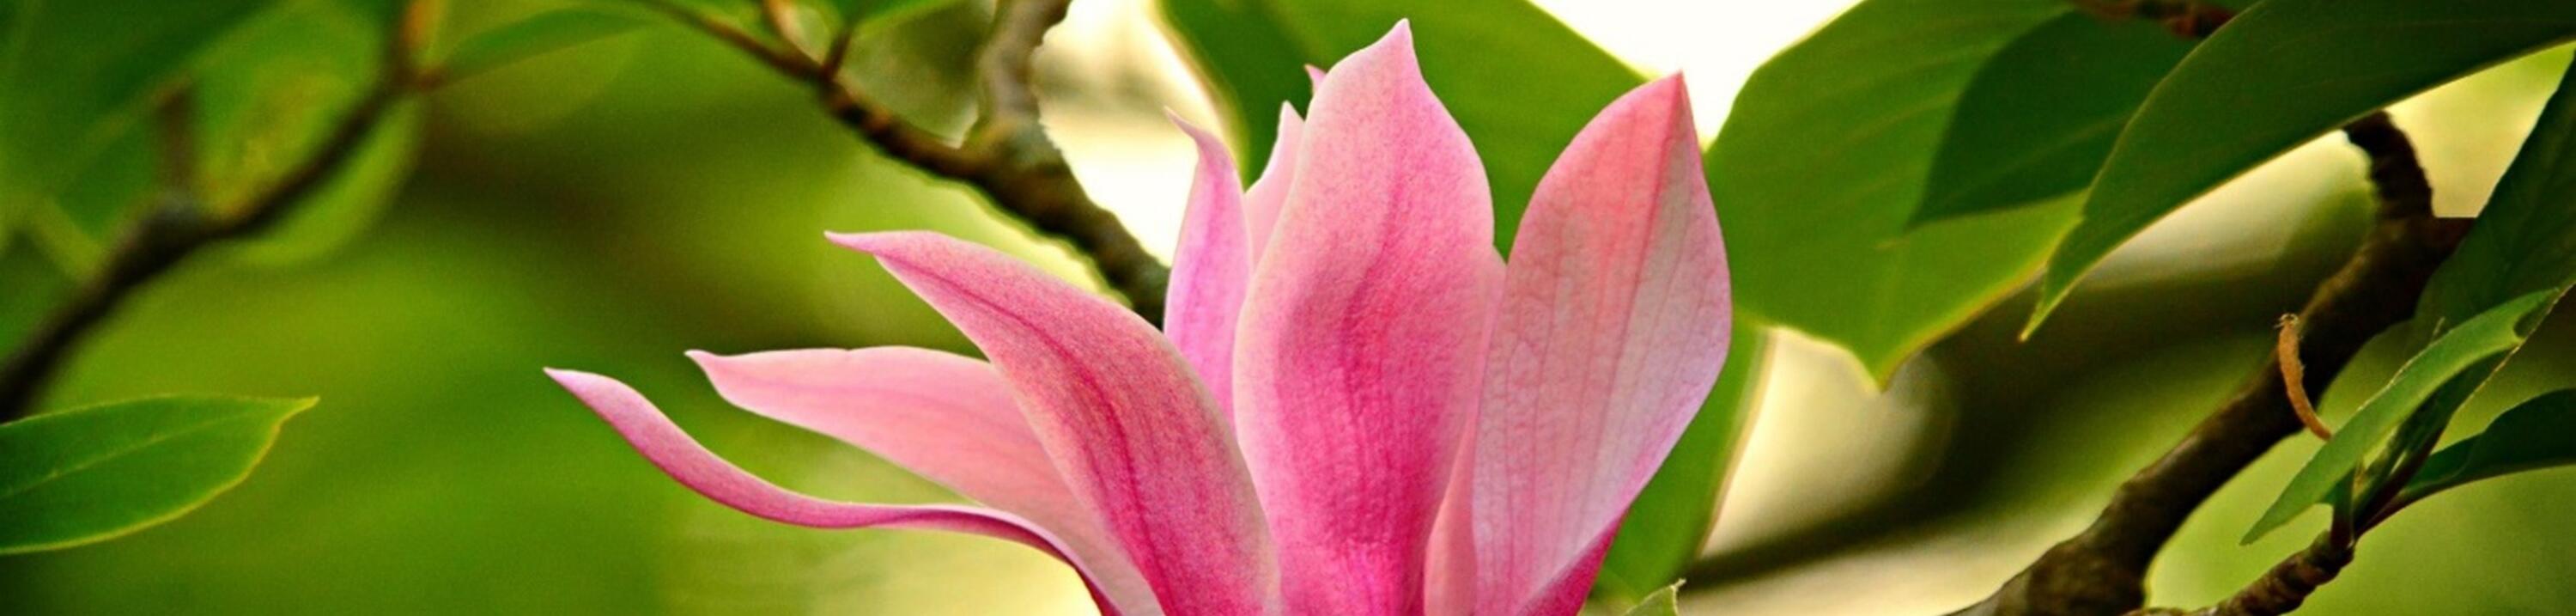 picture of a magnolia flower